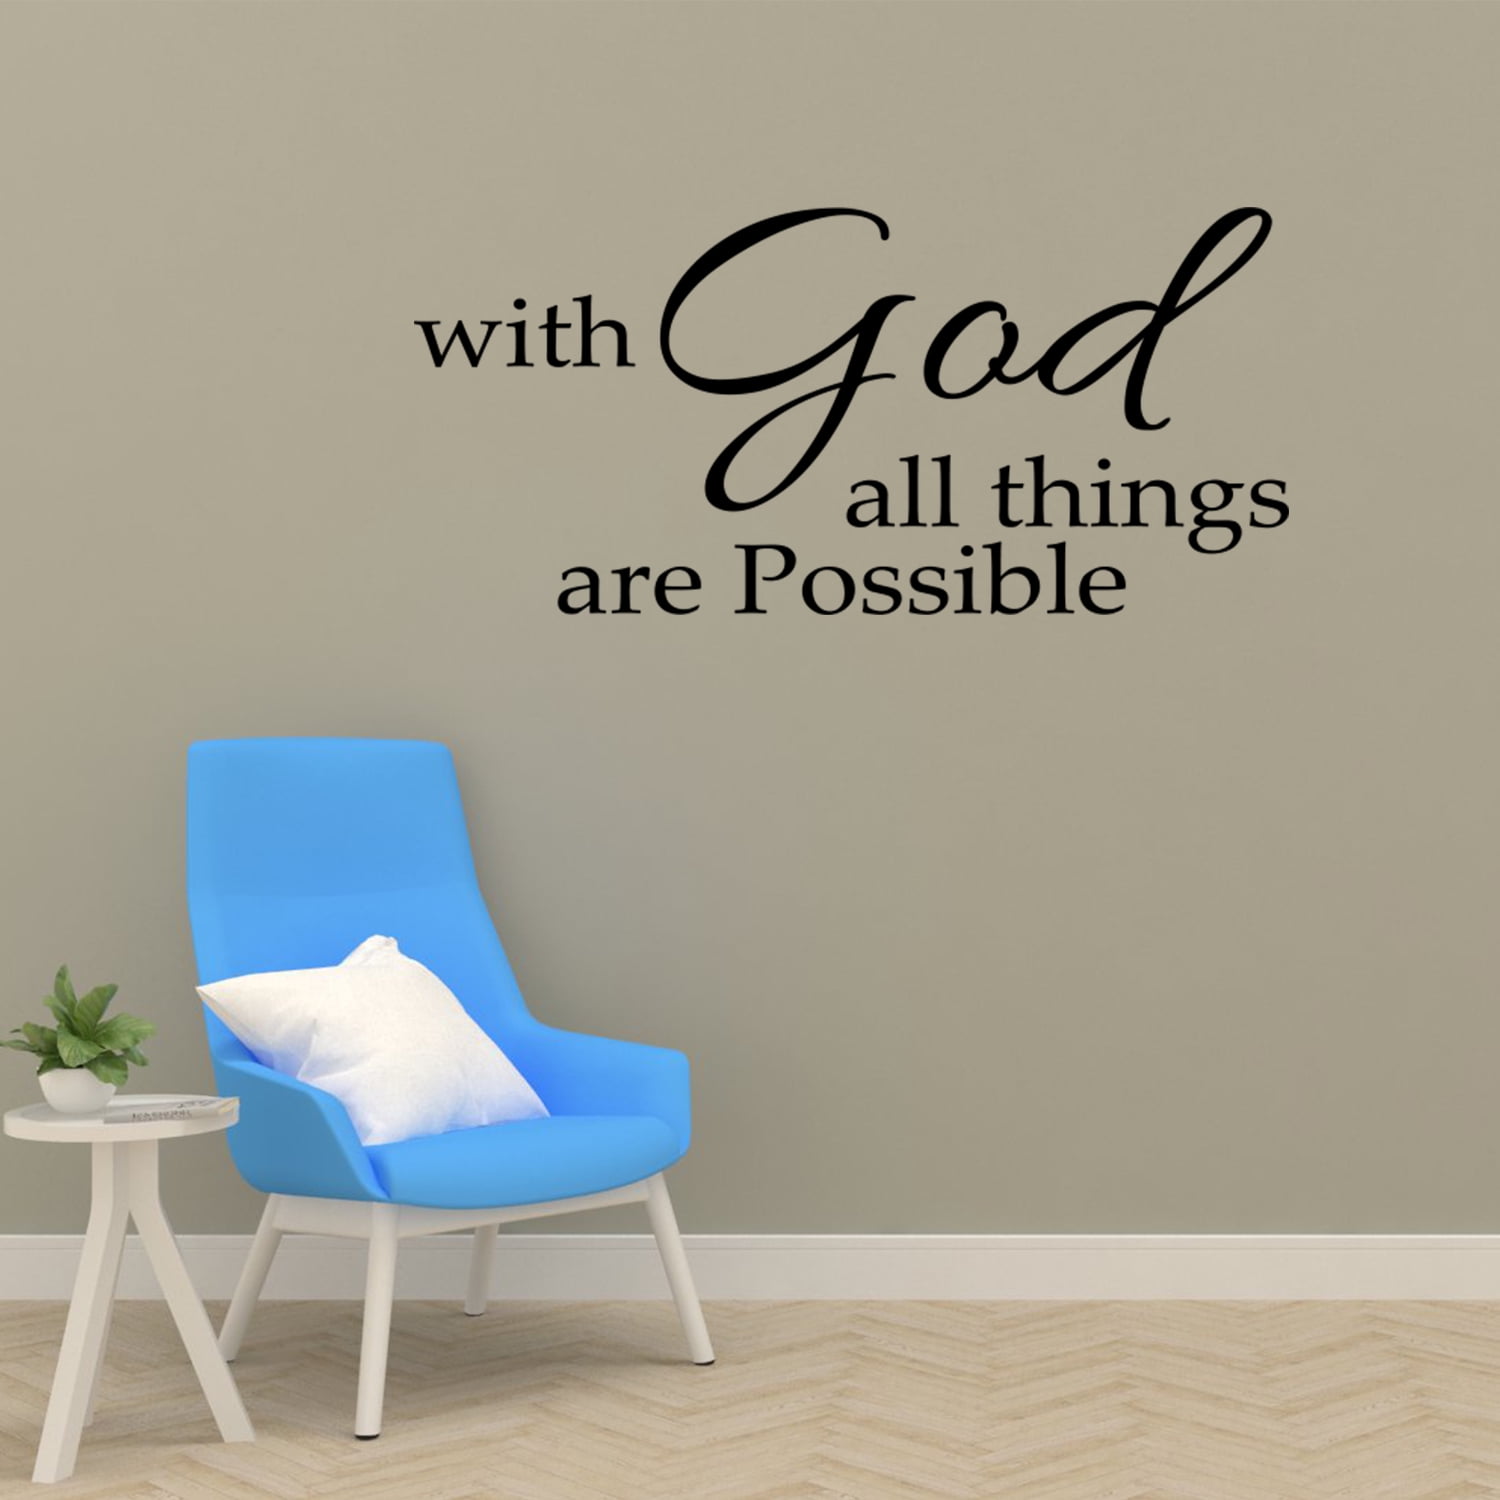 With God All Things Are Possible Decal Christian Wall Art Sticker Bible Verse Wall Decor Walmart Com Walmart Com